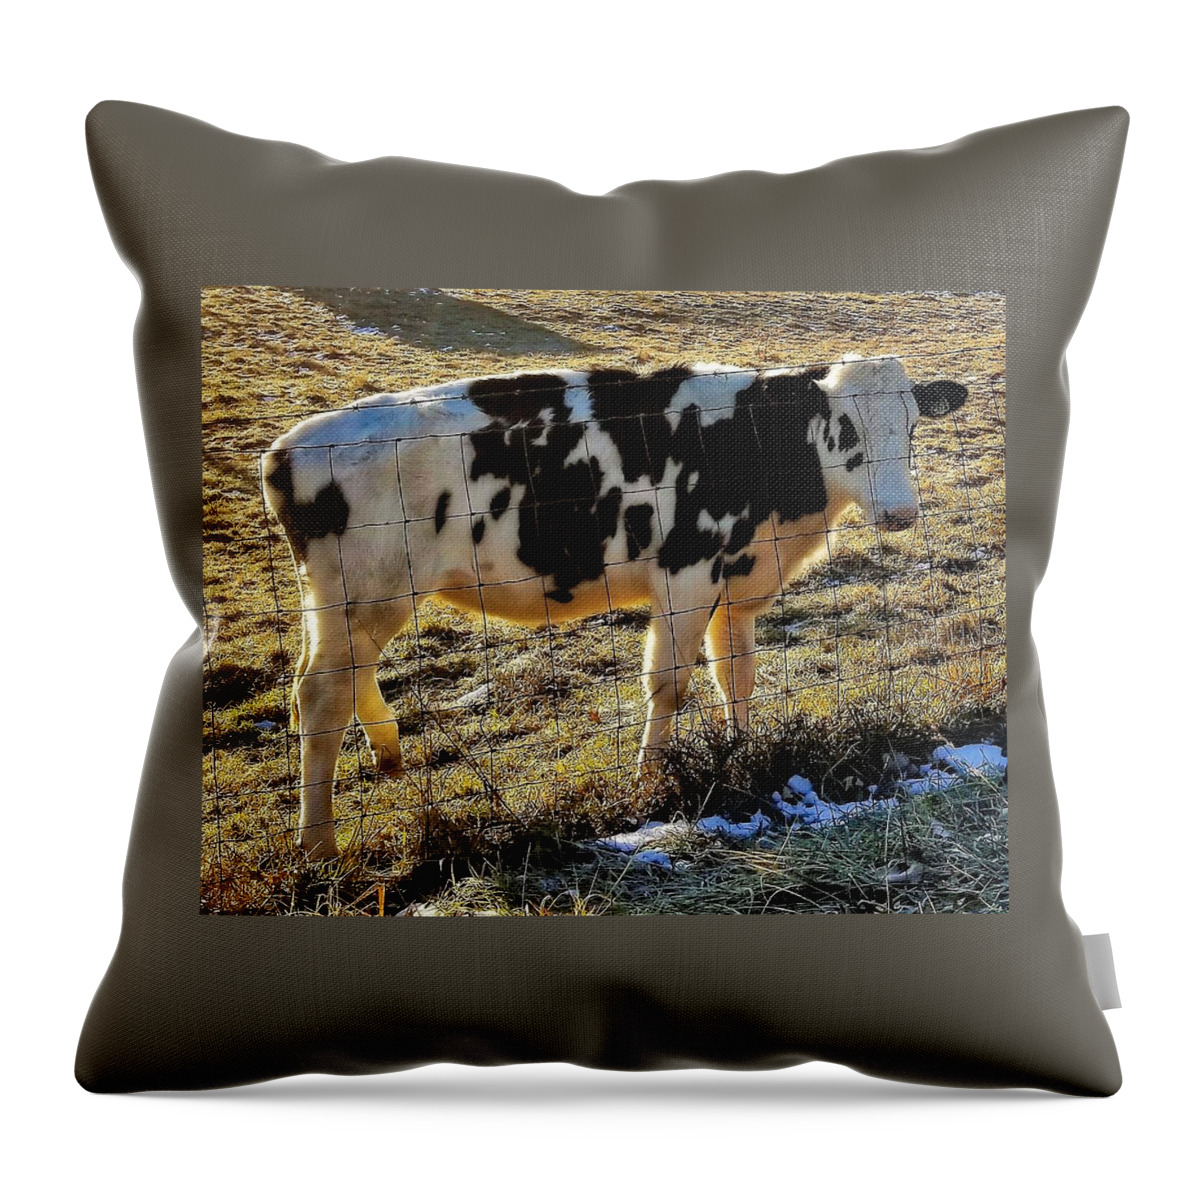 Cow Throw Pillow featuring the photograph Good Morning by Jim Harris